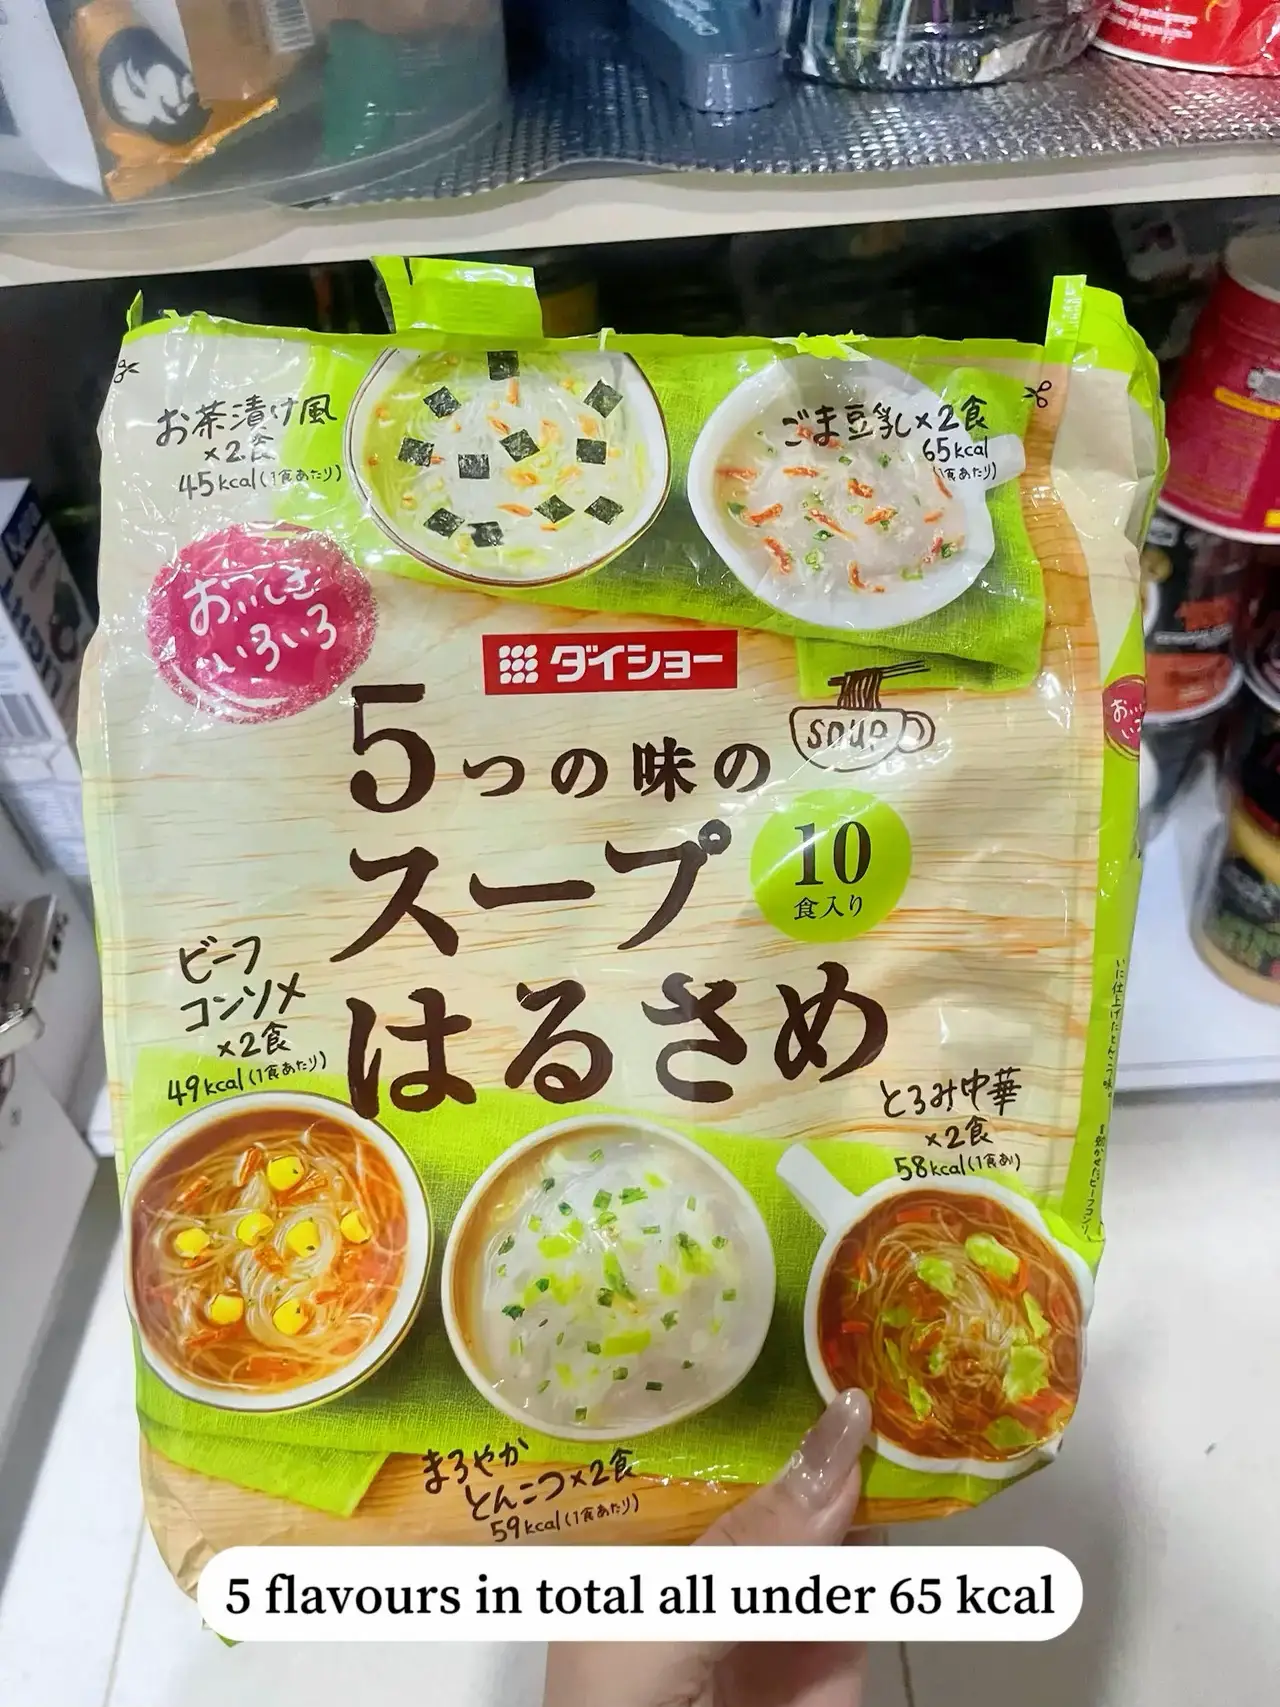 Mini instant noodle to curb cravings while on diet's images(5)